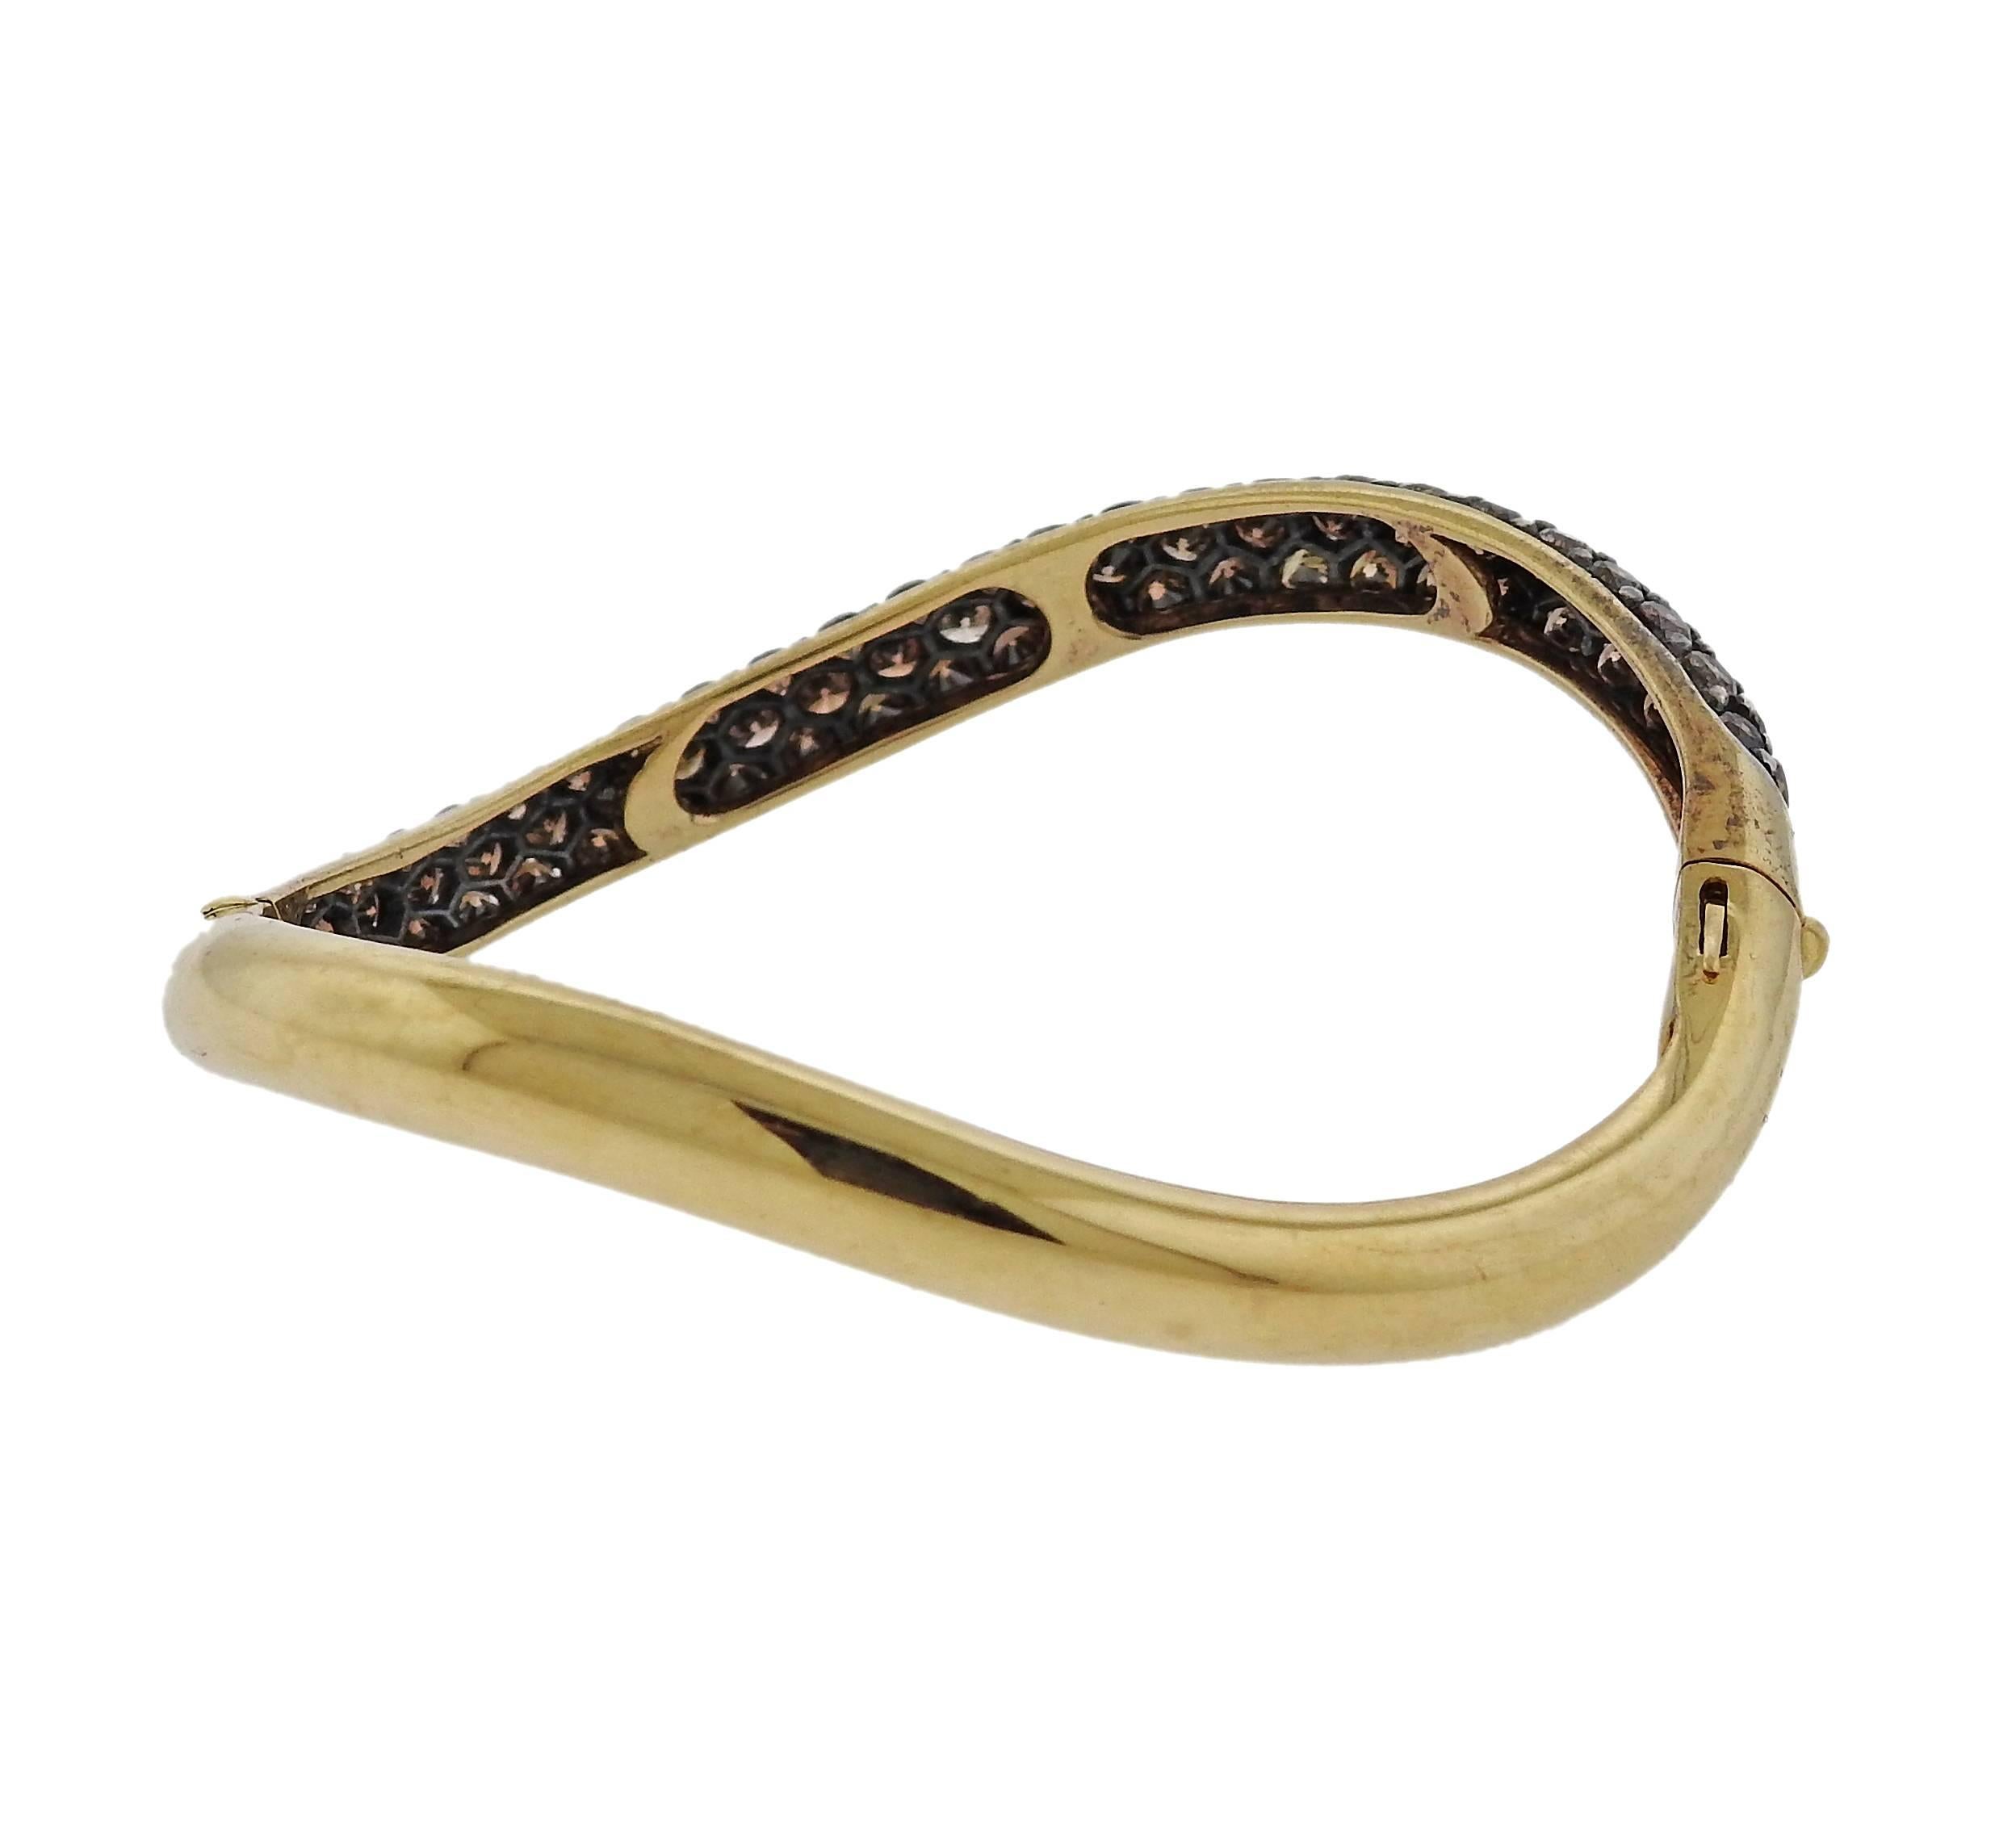 An 18k yellow gold wave bracelet, decorated with approx. 6.00ctw in fancy diamonds. Crafted by Gioia. Will fit approximately 7" wrist. 6.5mm wide. Marked: 750, Gioia. Weight - 28.4 grams